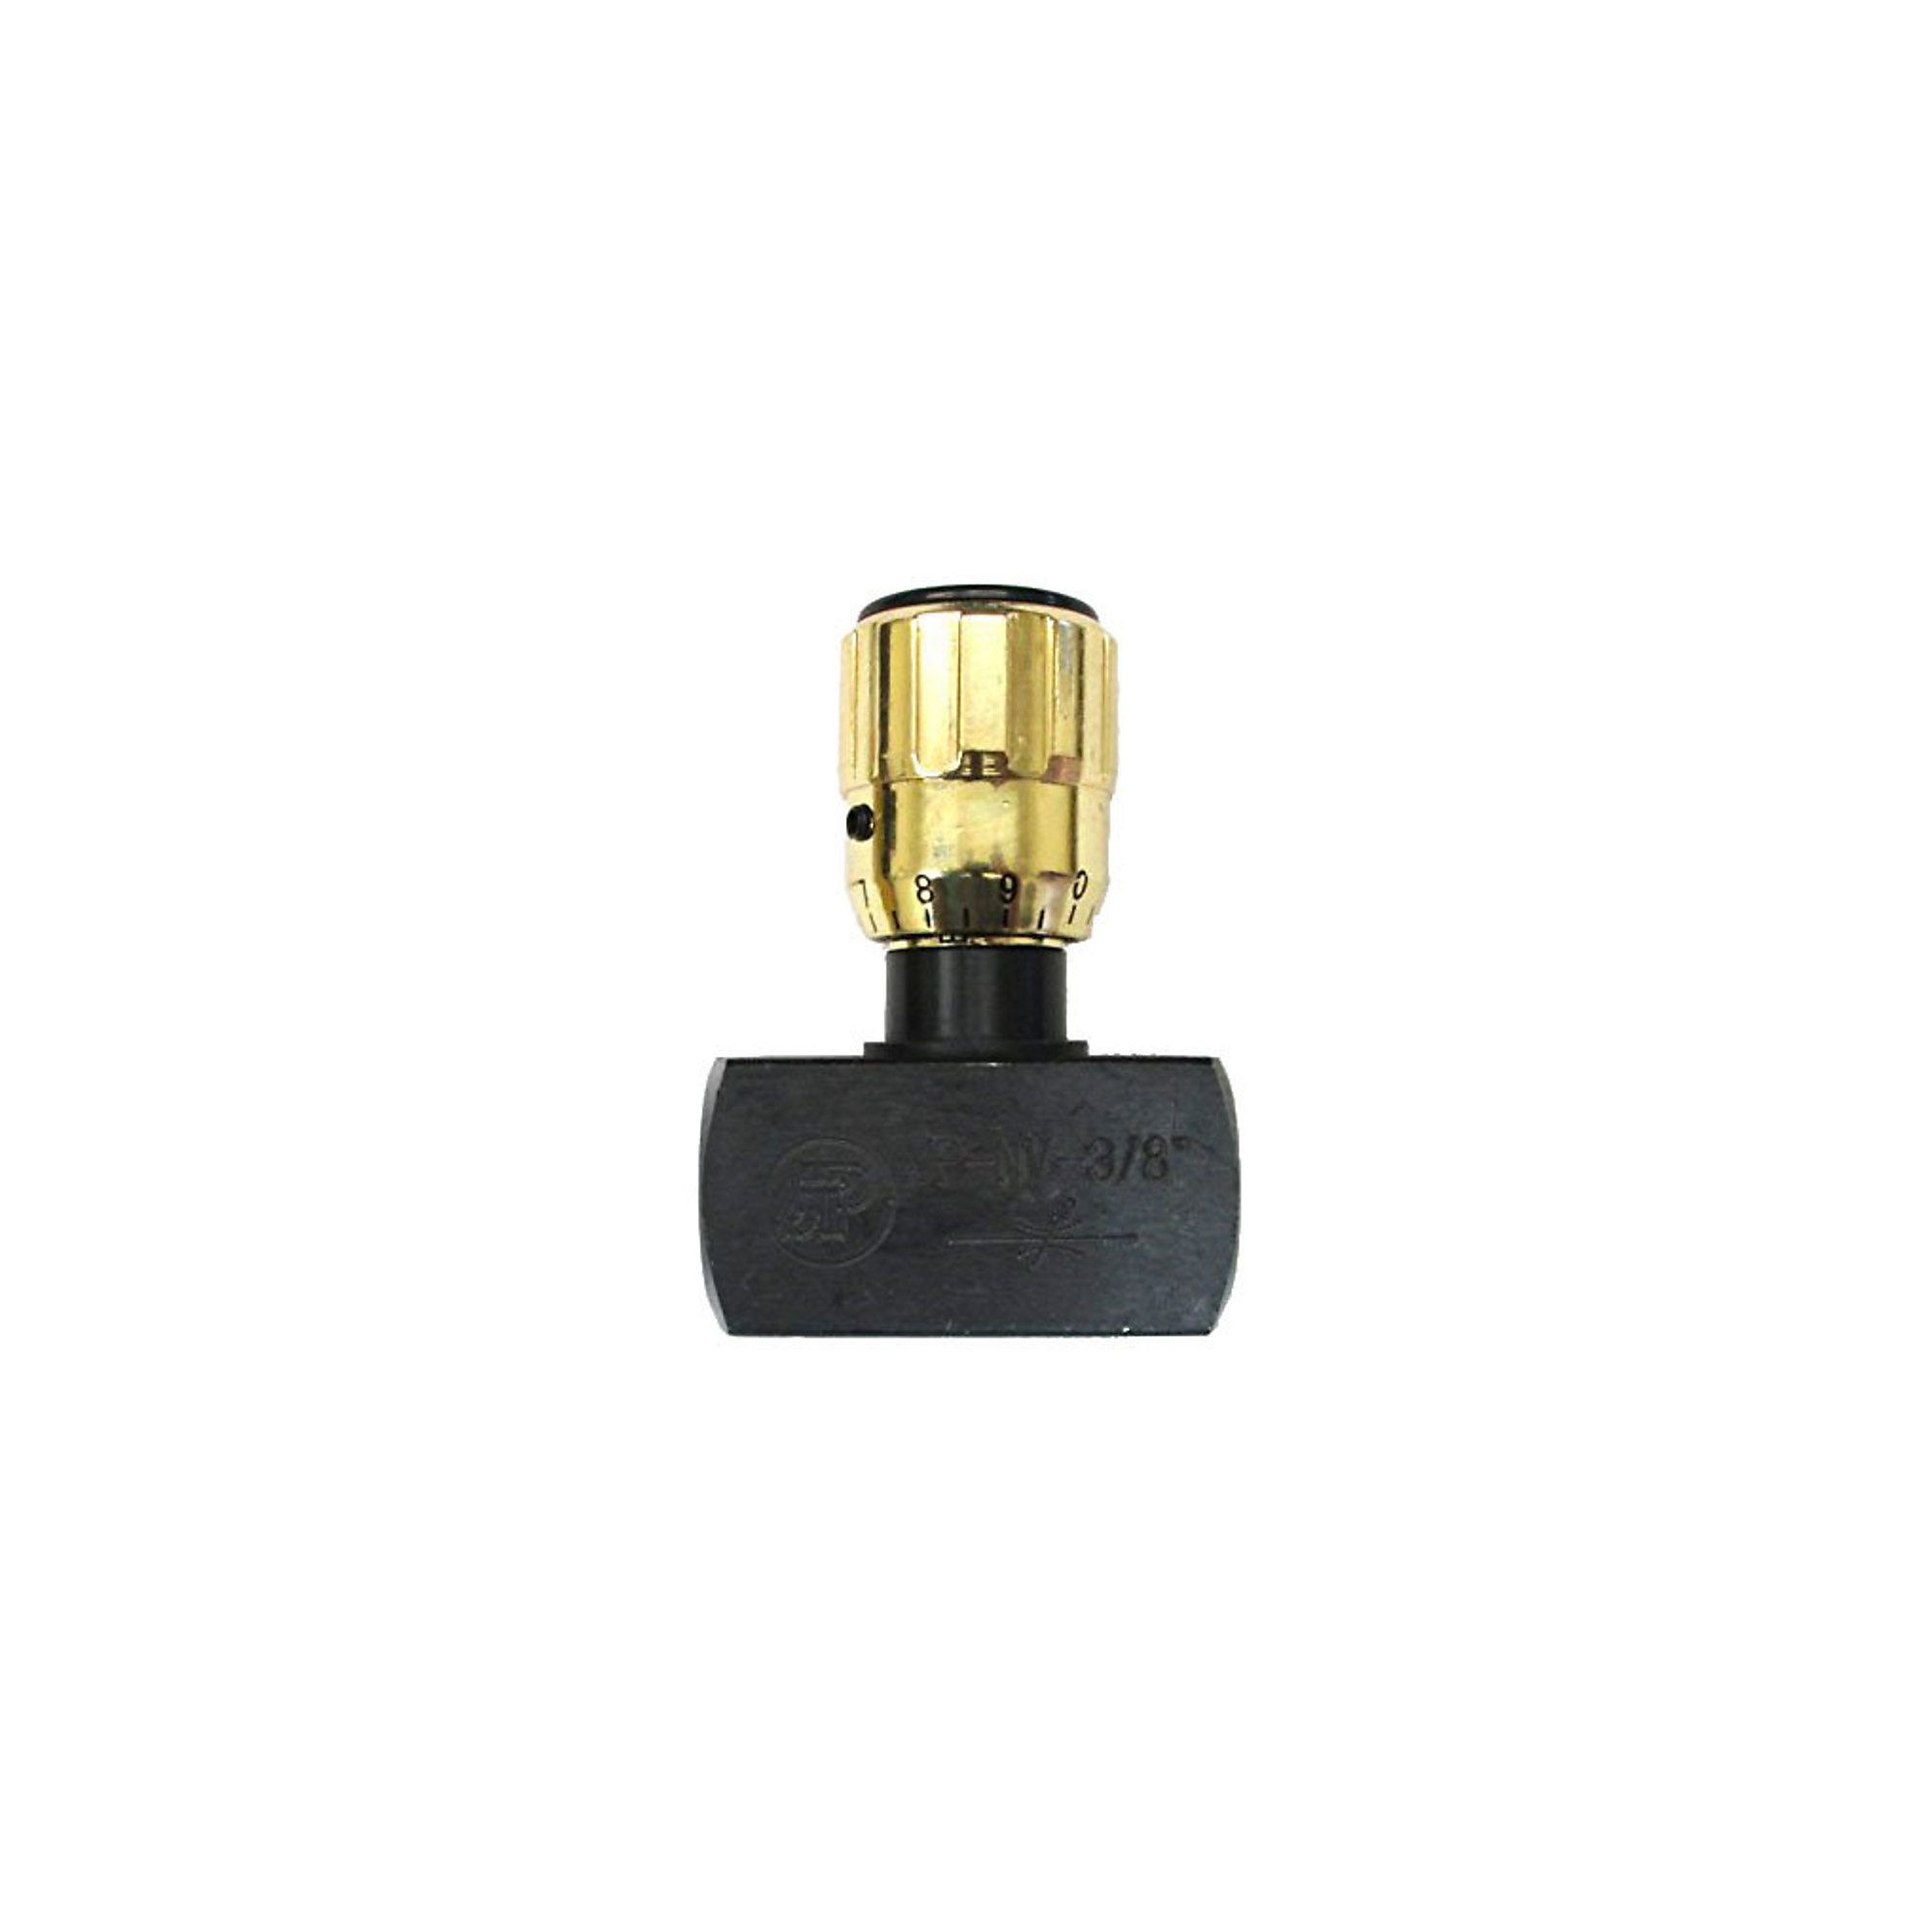 Dynamic, Hydraulic Needle Valve, GPM 0, Working Port 1/4 NPT in, Max. PSI 5000, Model 450060